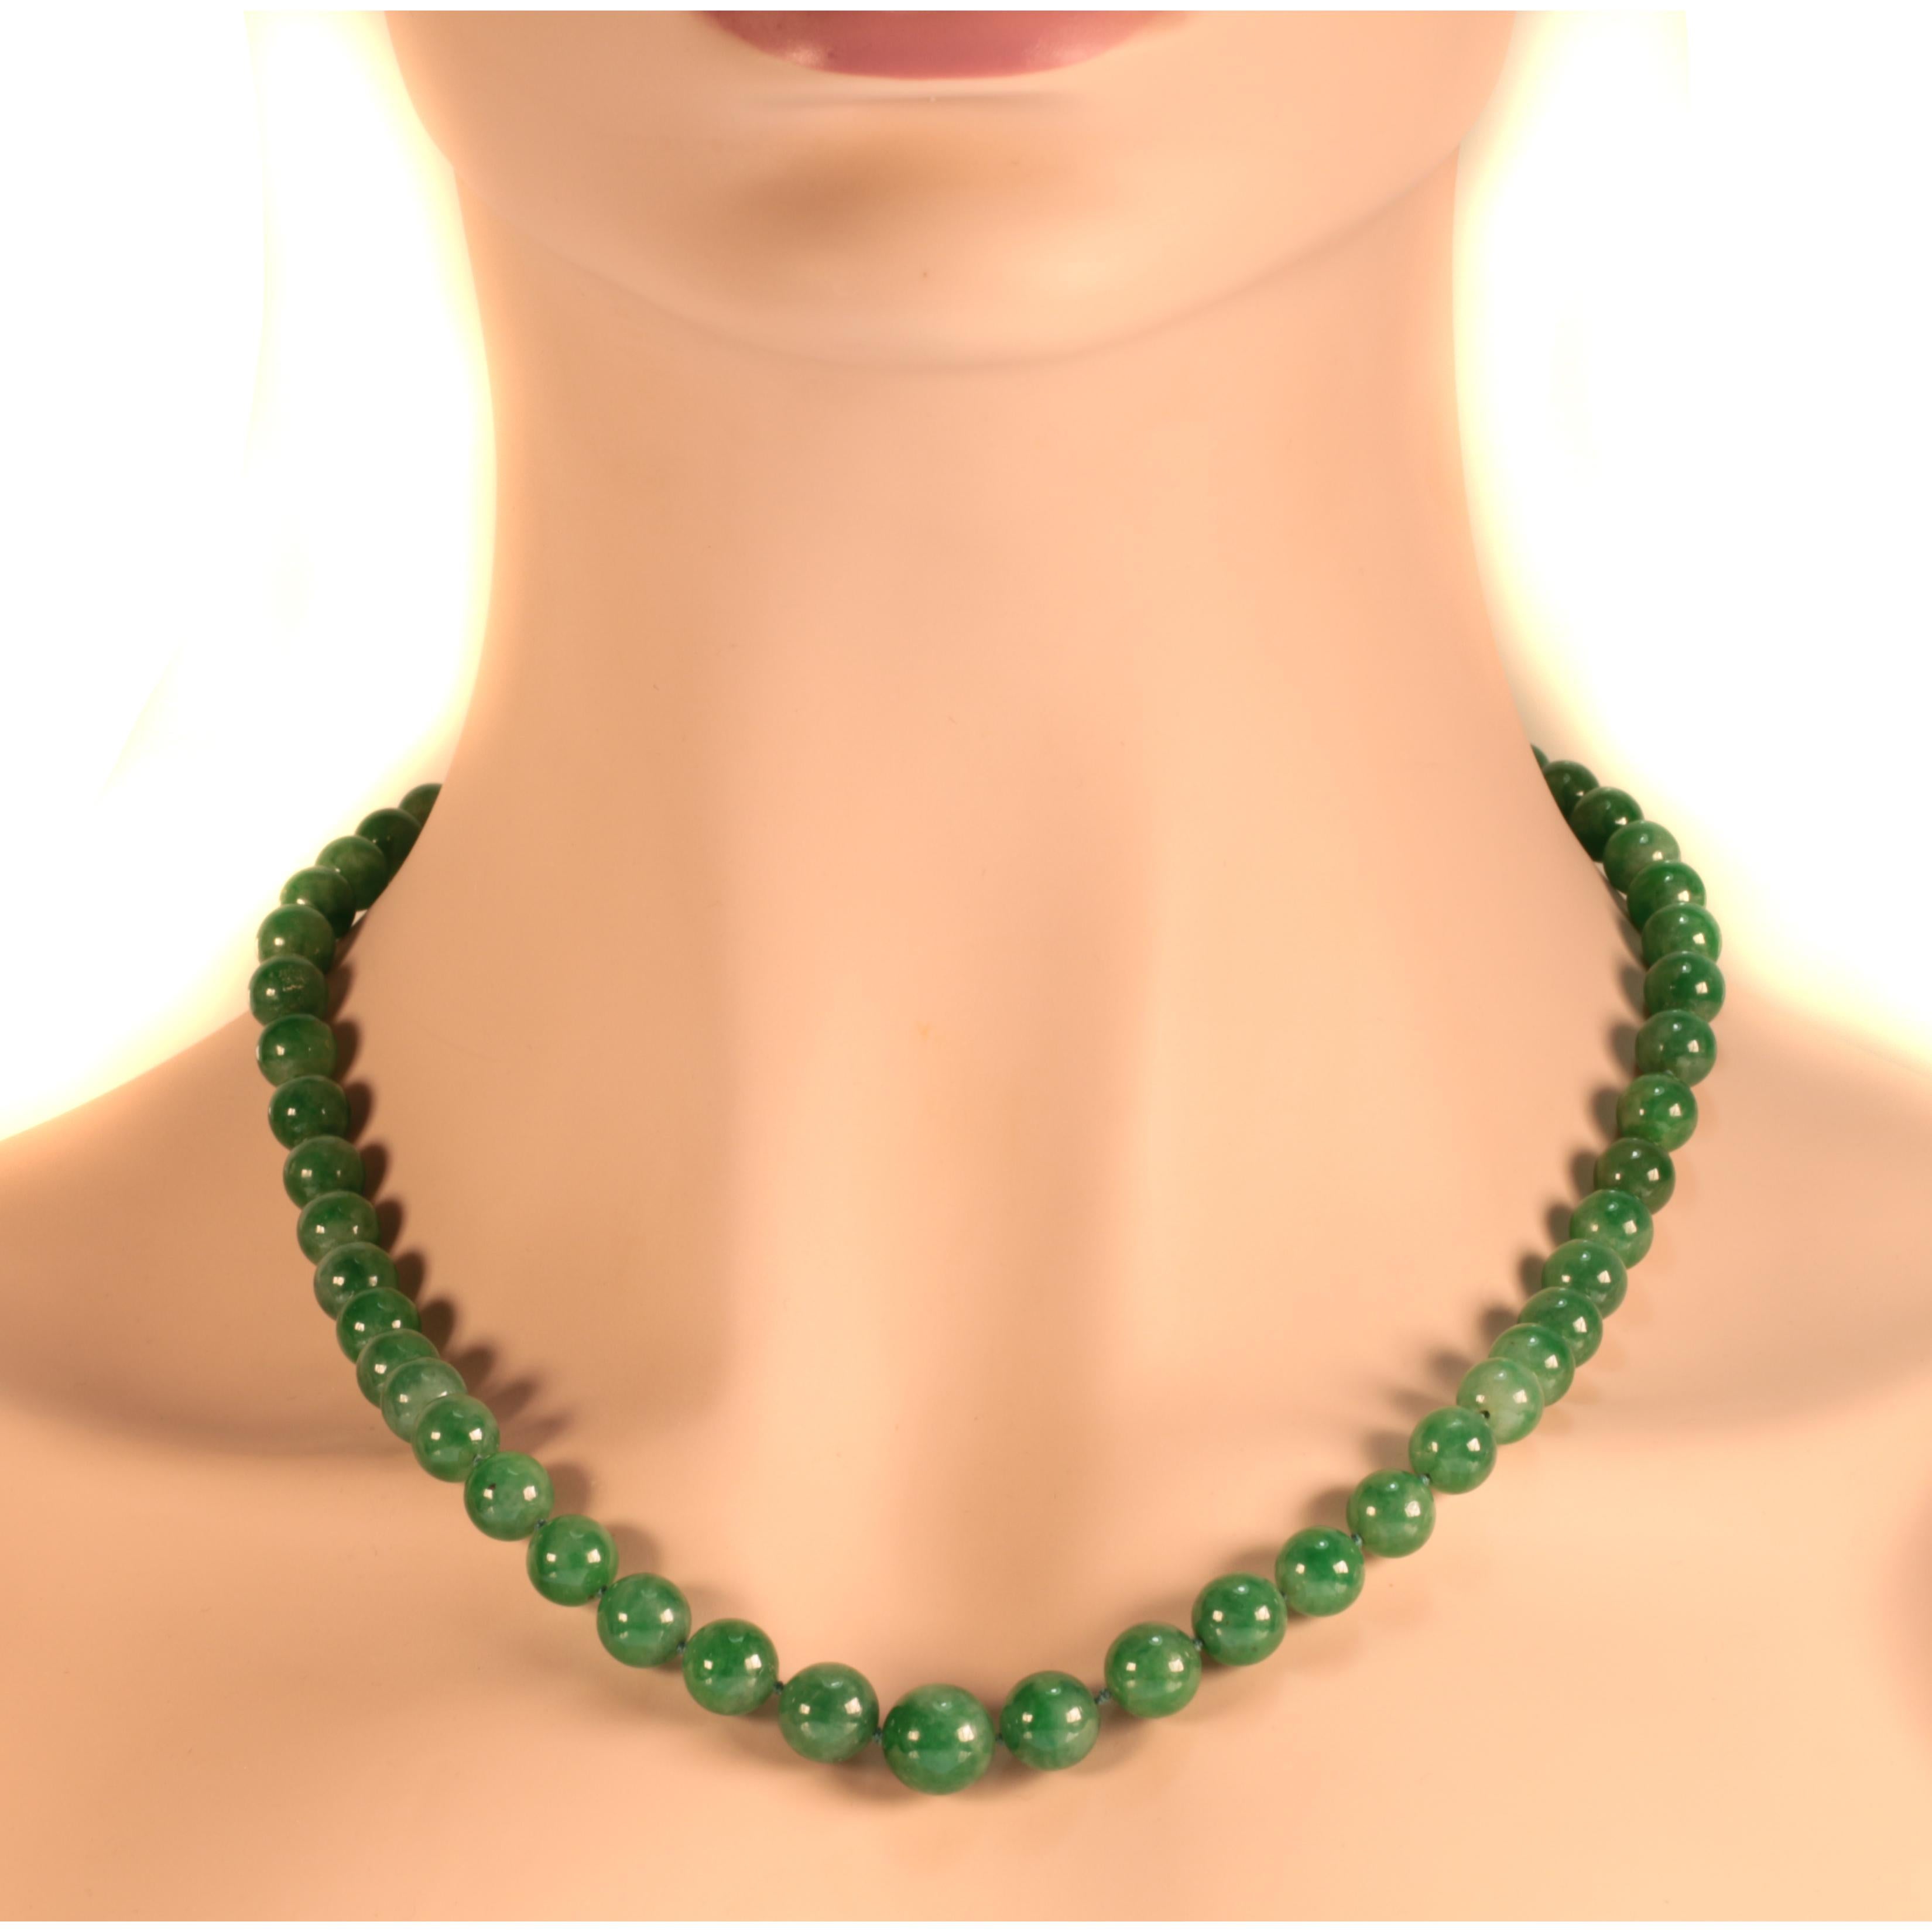 Certified Top Quality Natural A-Jadeite Necklace of 53 Beads '67.51 Grams' For Sale 5